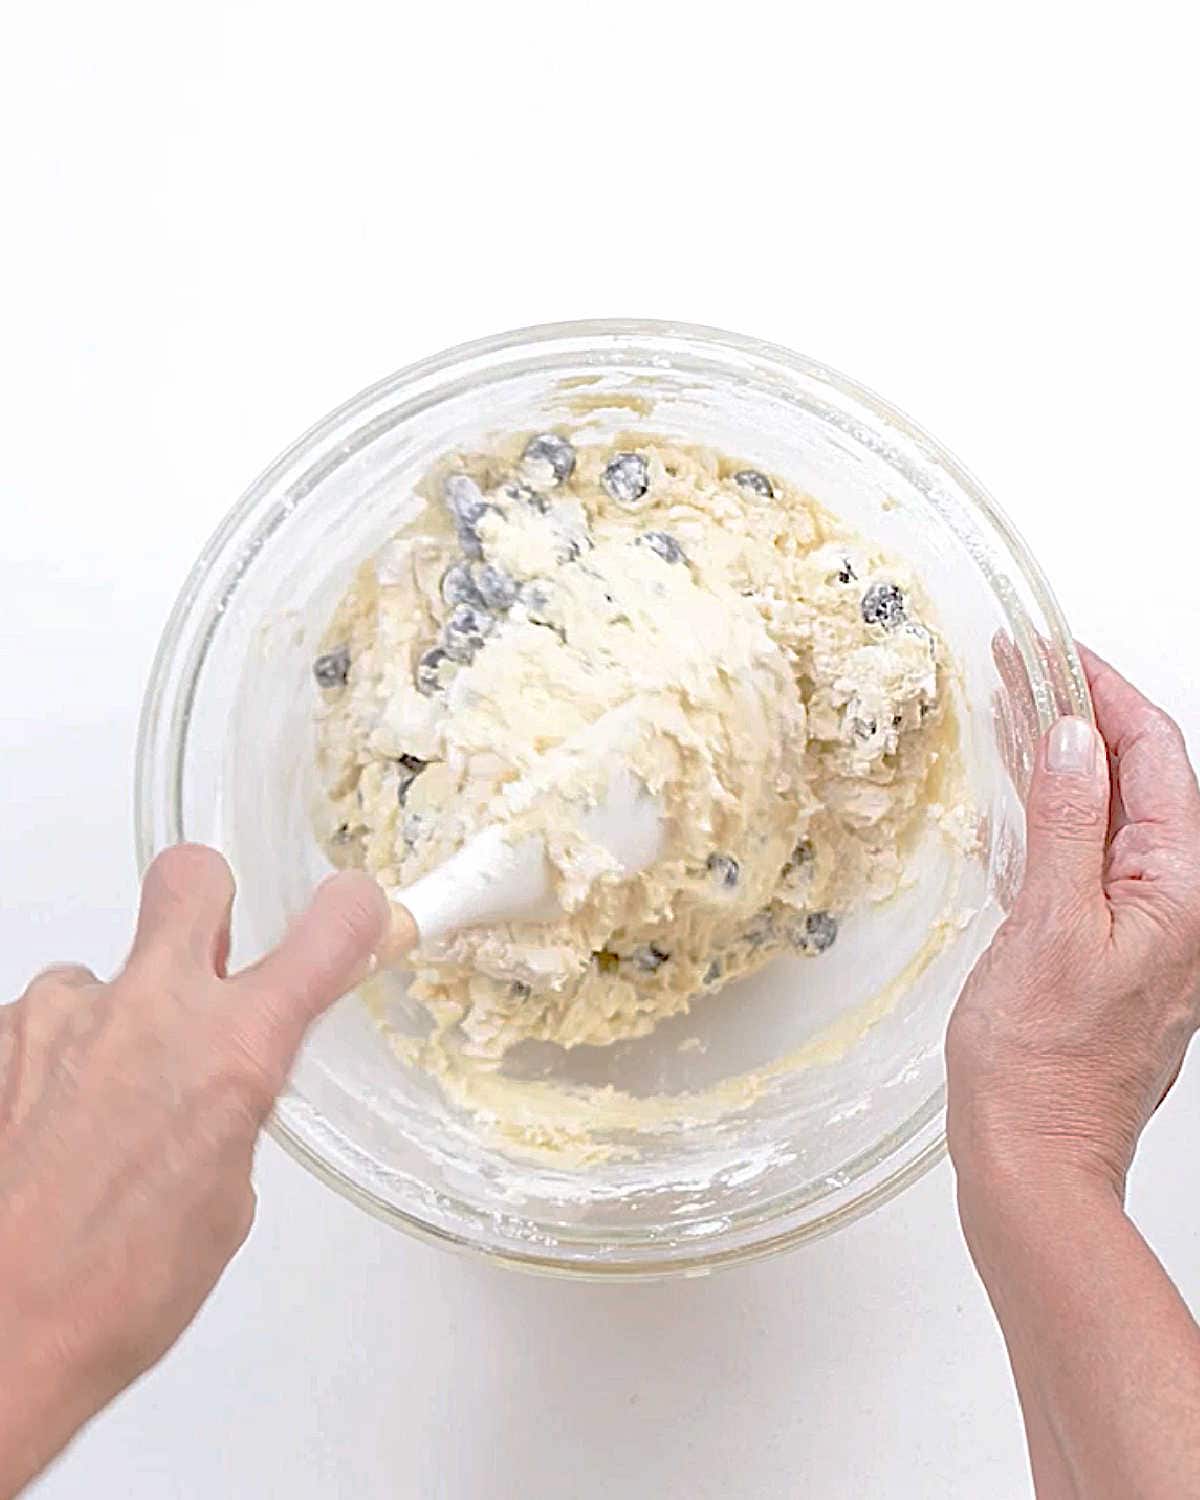 Mixing blueberry cake batter in a glass bowl with a white spatula. White surface.